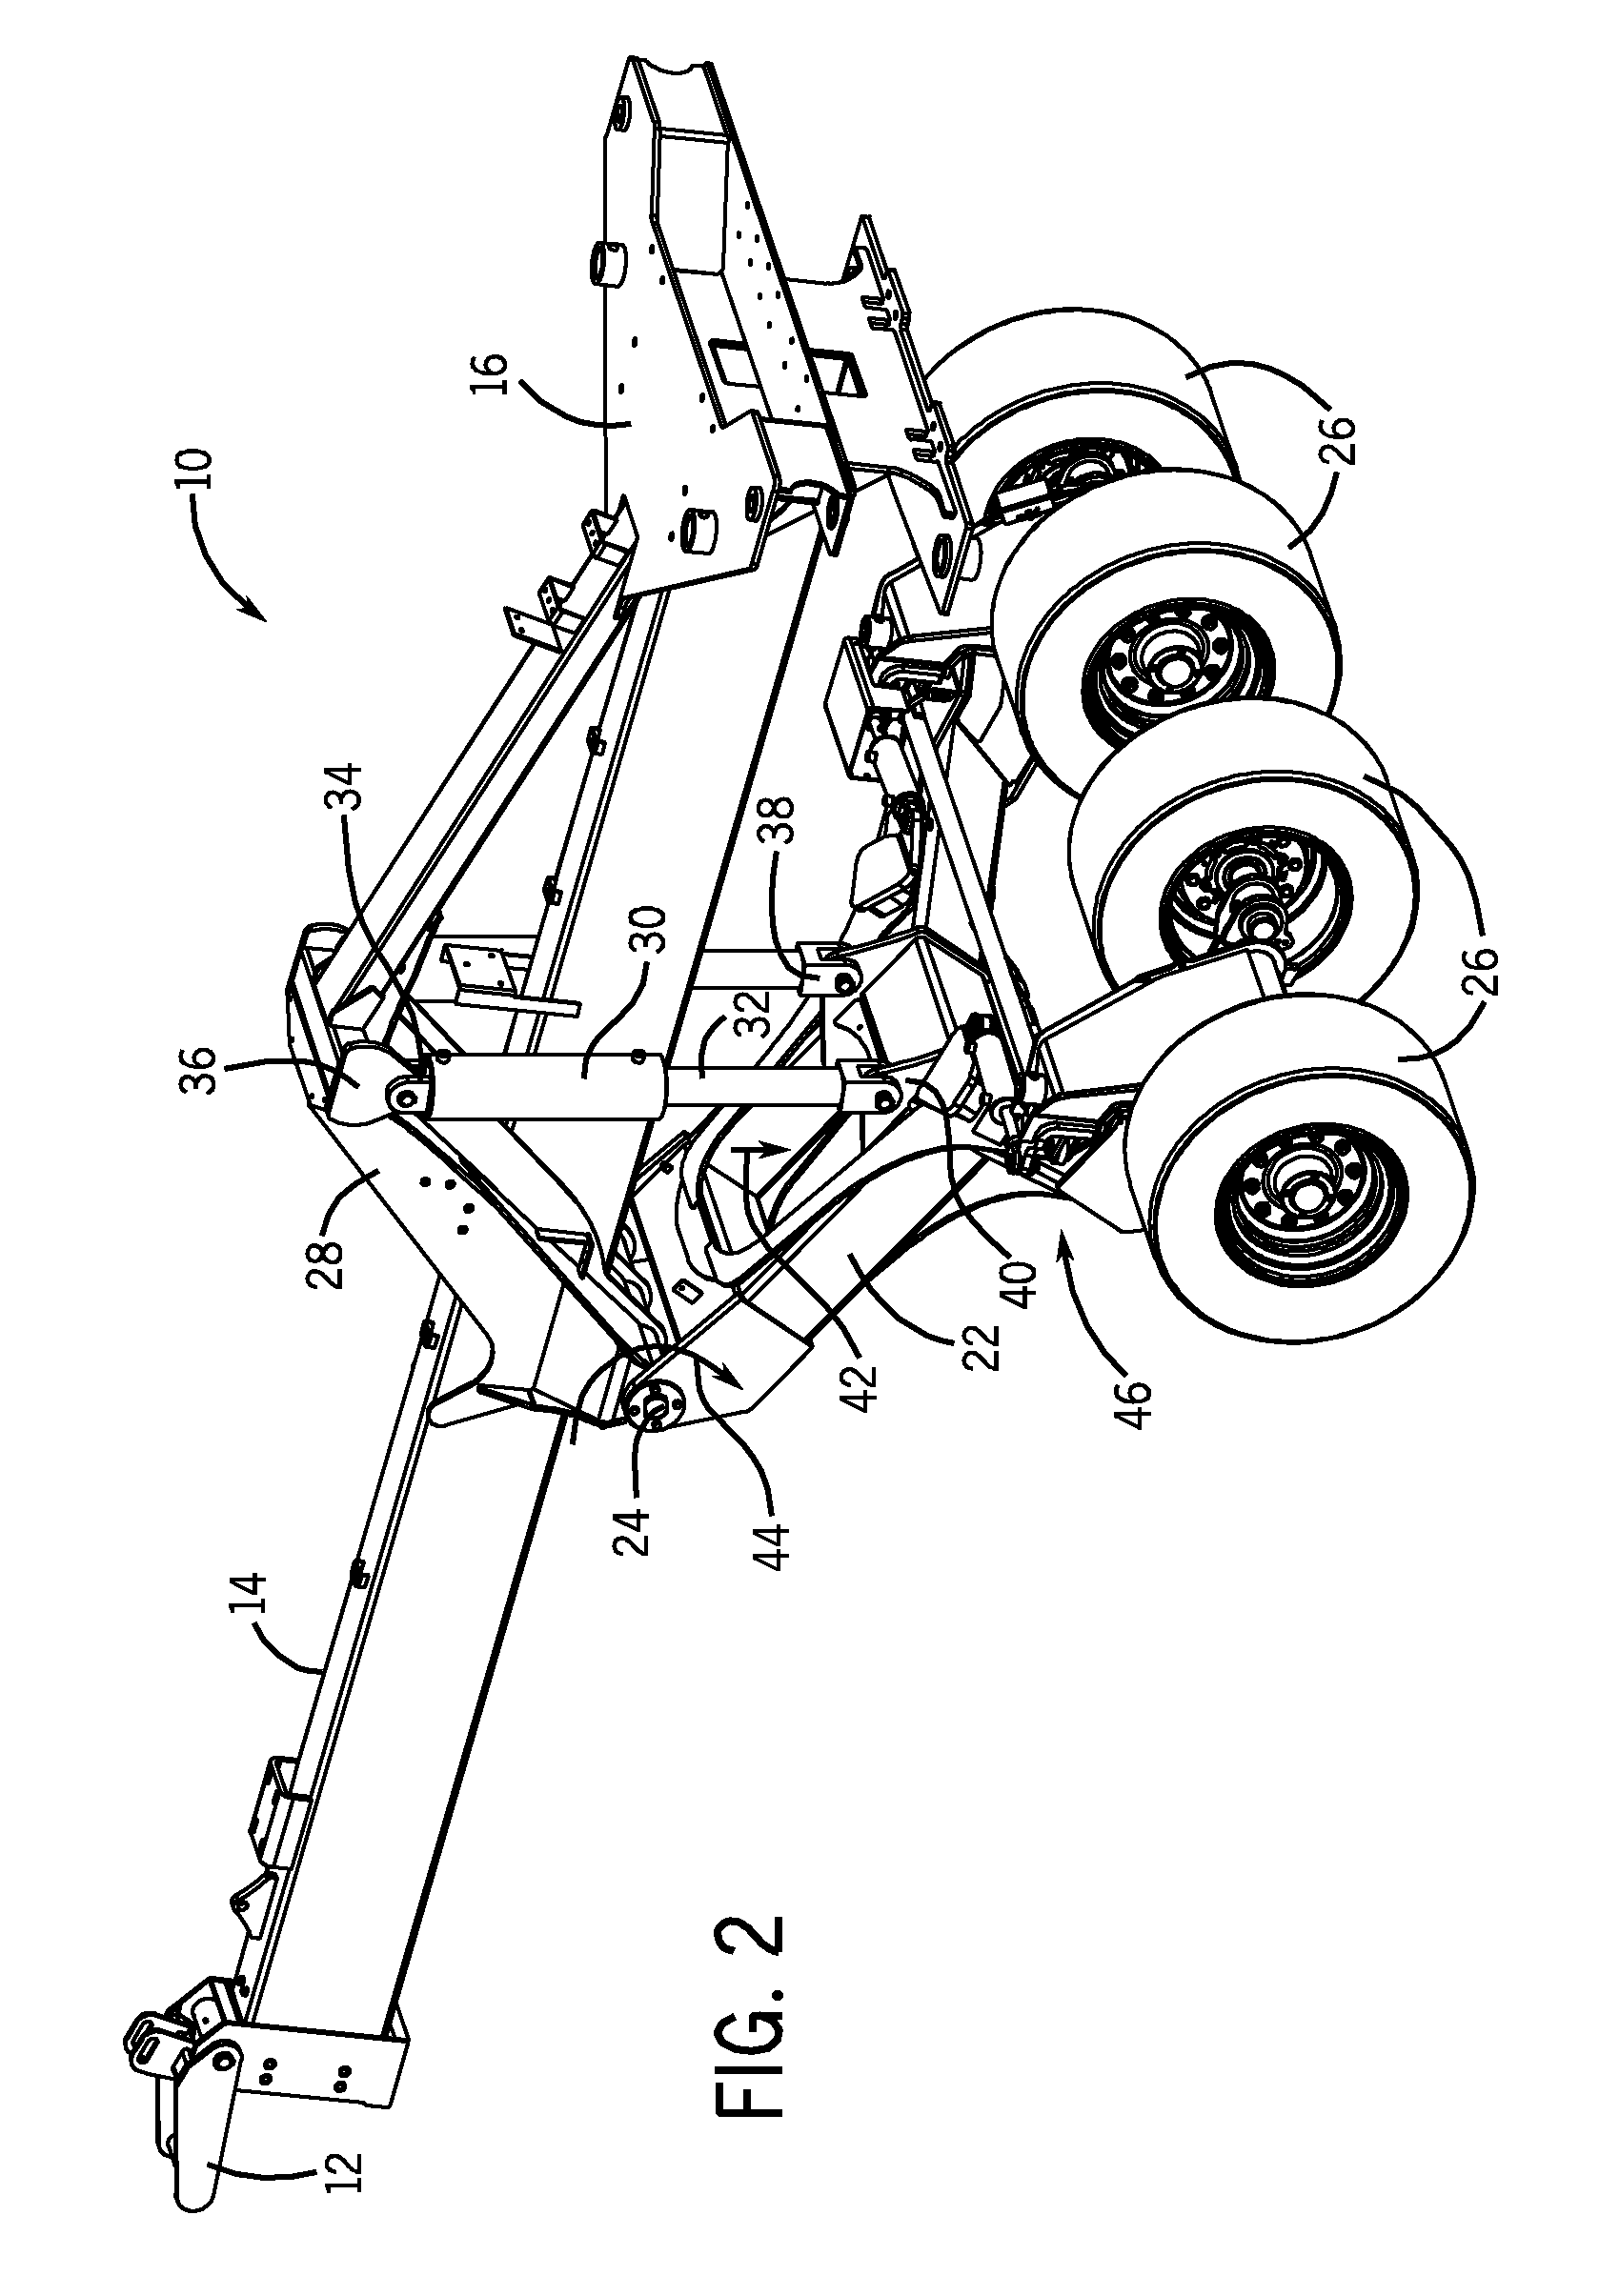 Steerable agricultural implement with adaptable wheel spacing